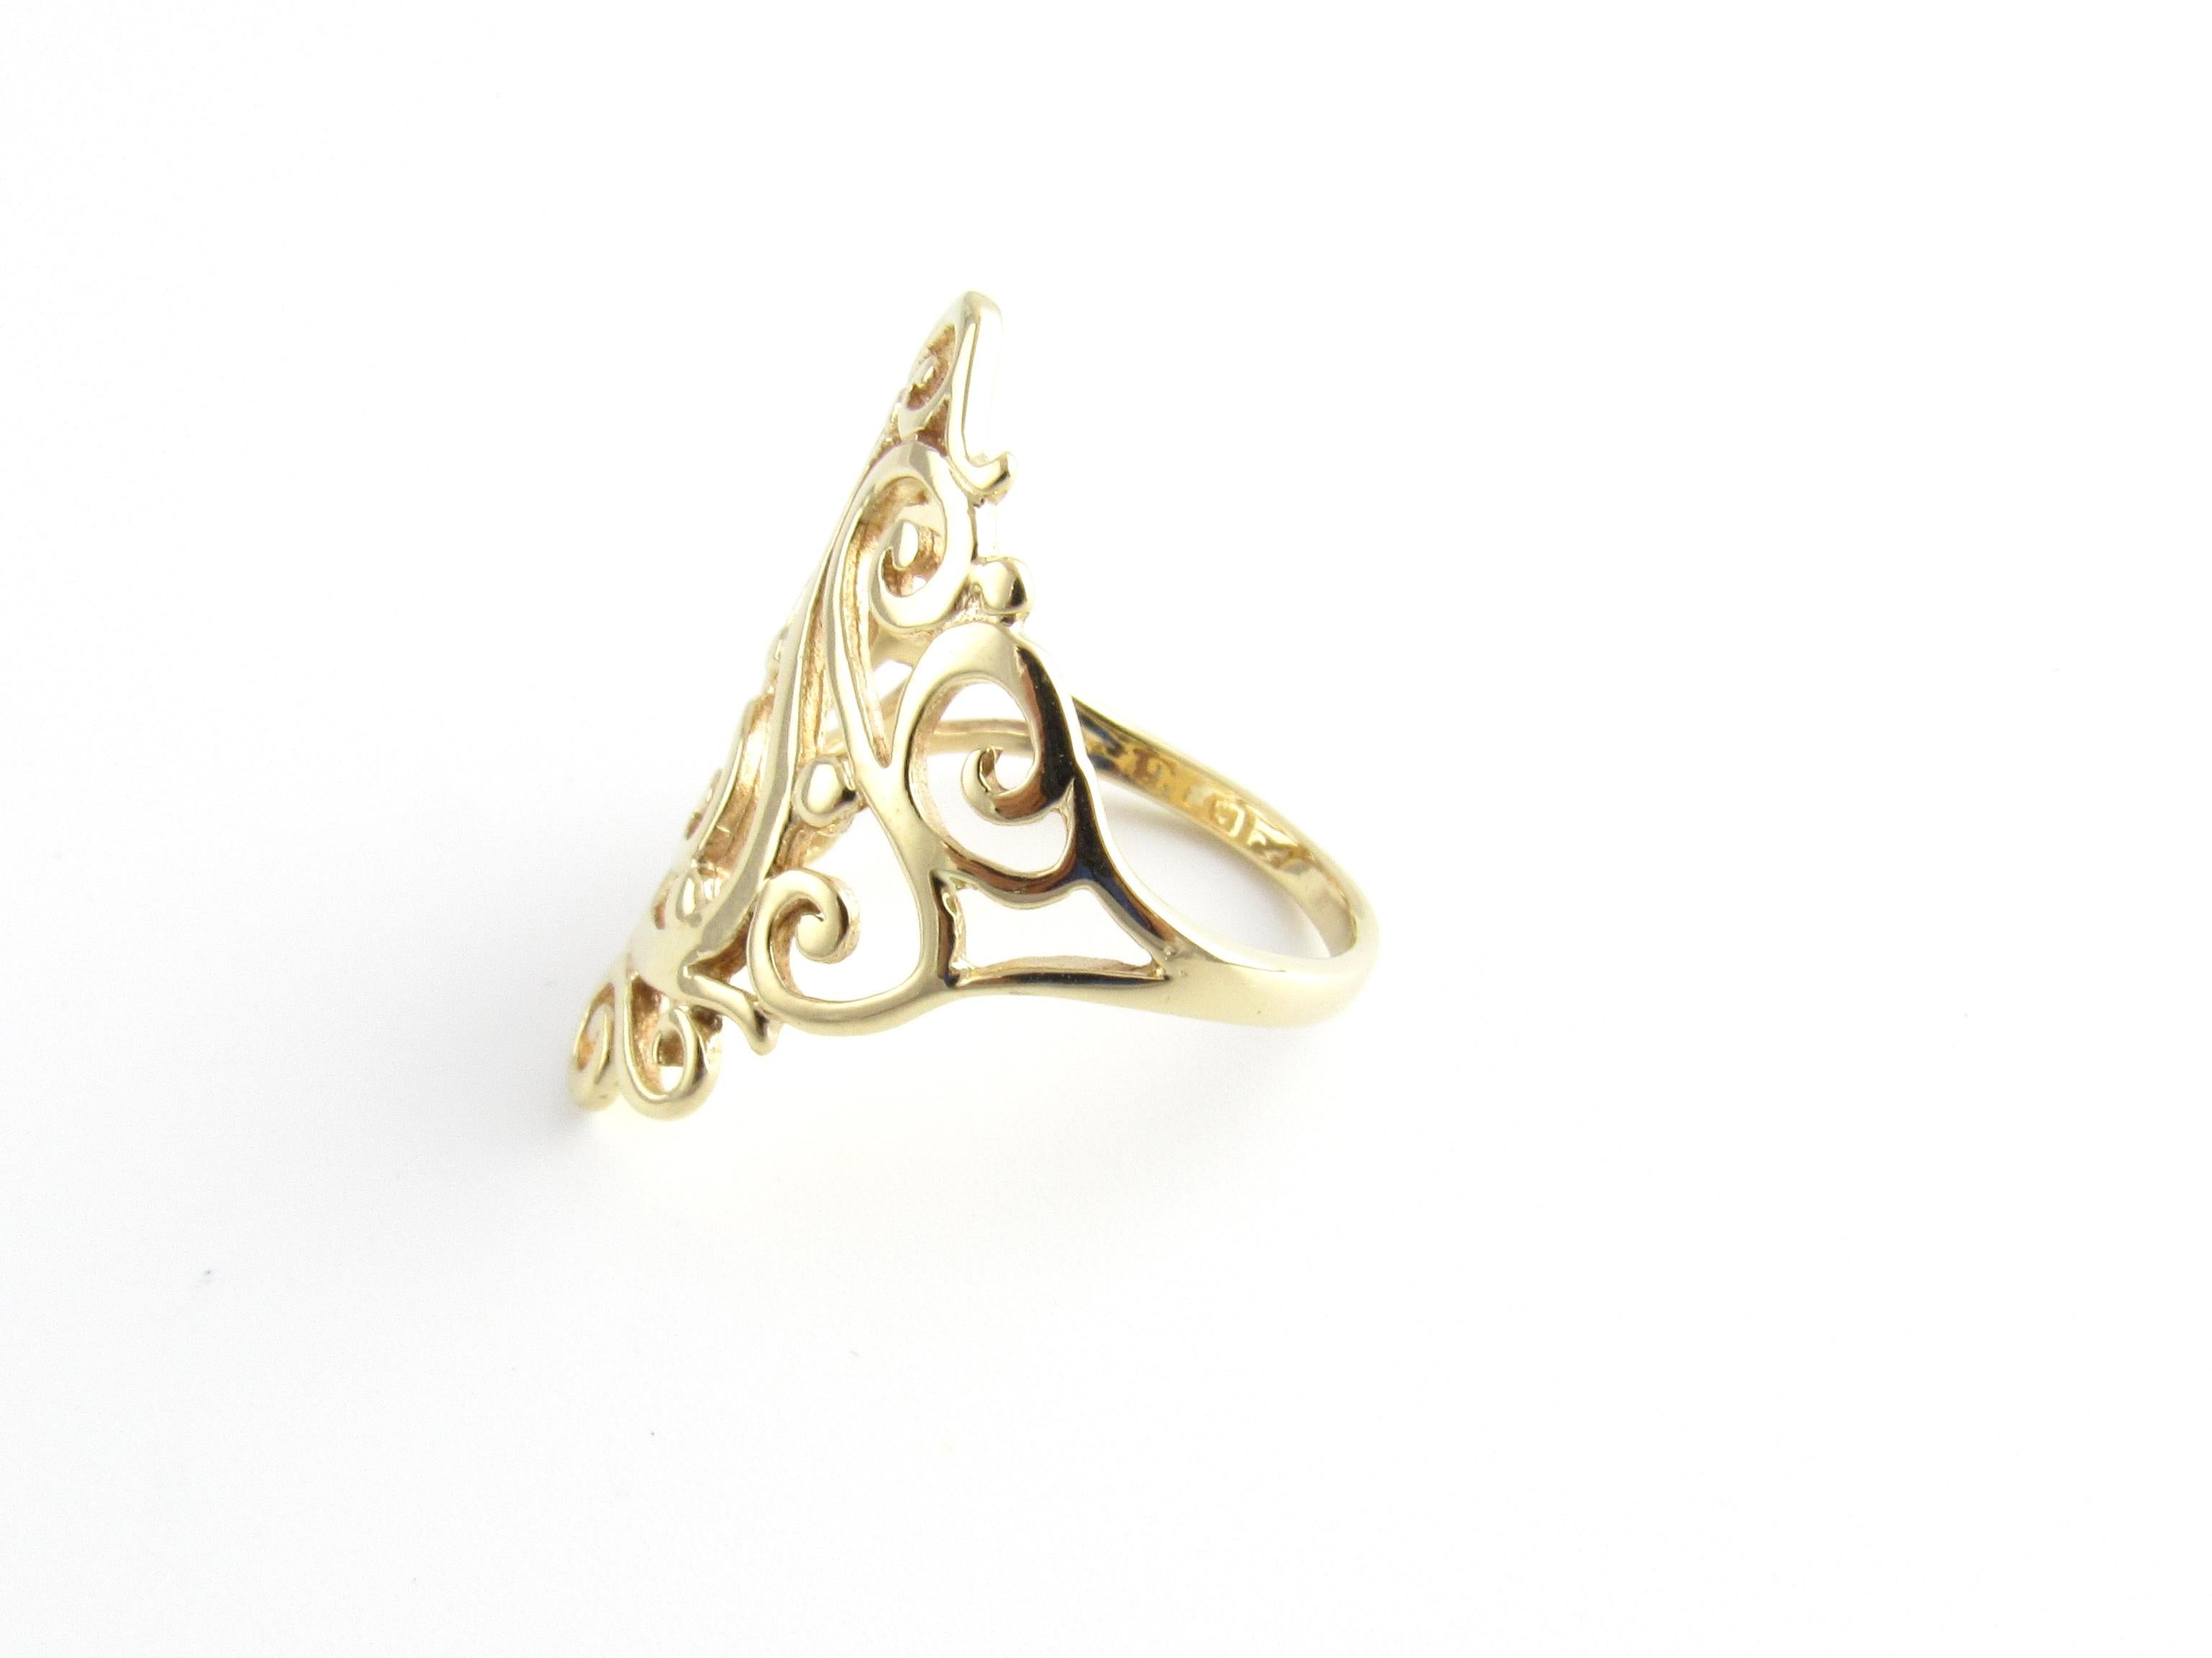 Vintage 14 Karat Yellow Gold James Avery Ring

This beautifully detailed ring is crafted in 14K yellow gold in a stunning scroll design.

Width: 30 mm.

Shank: 2 mm.

Ring Size: 10.75

Weight: 4.2 dwt. / 6.6 gr.

Stamped: 14K

Hallmark: James